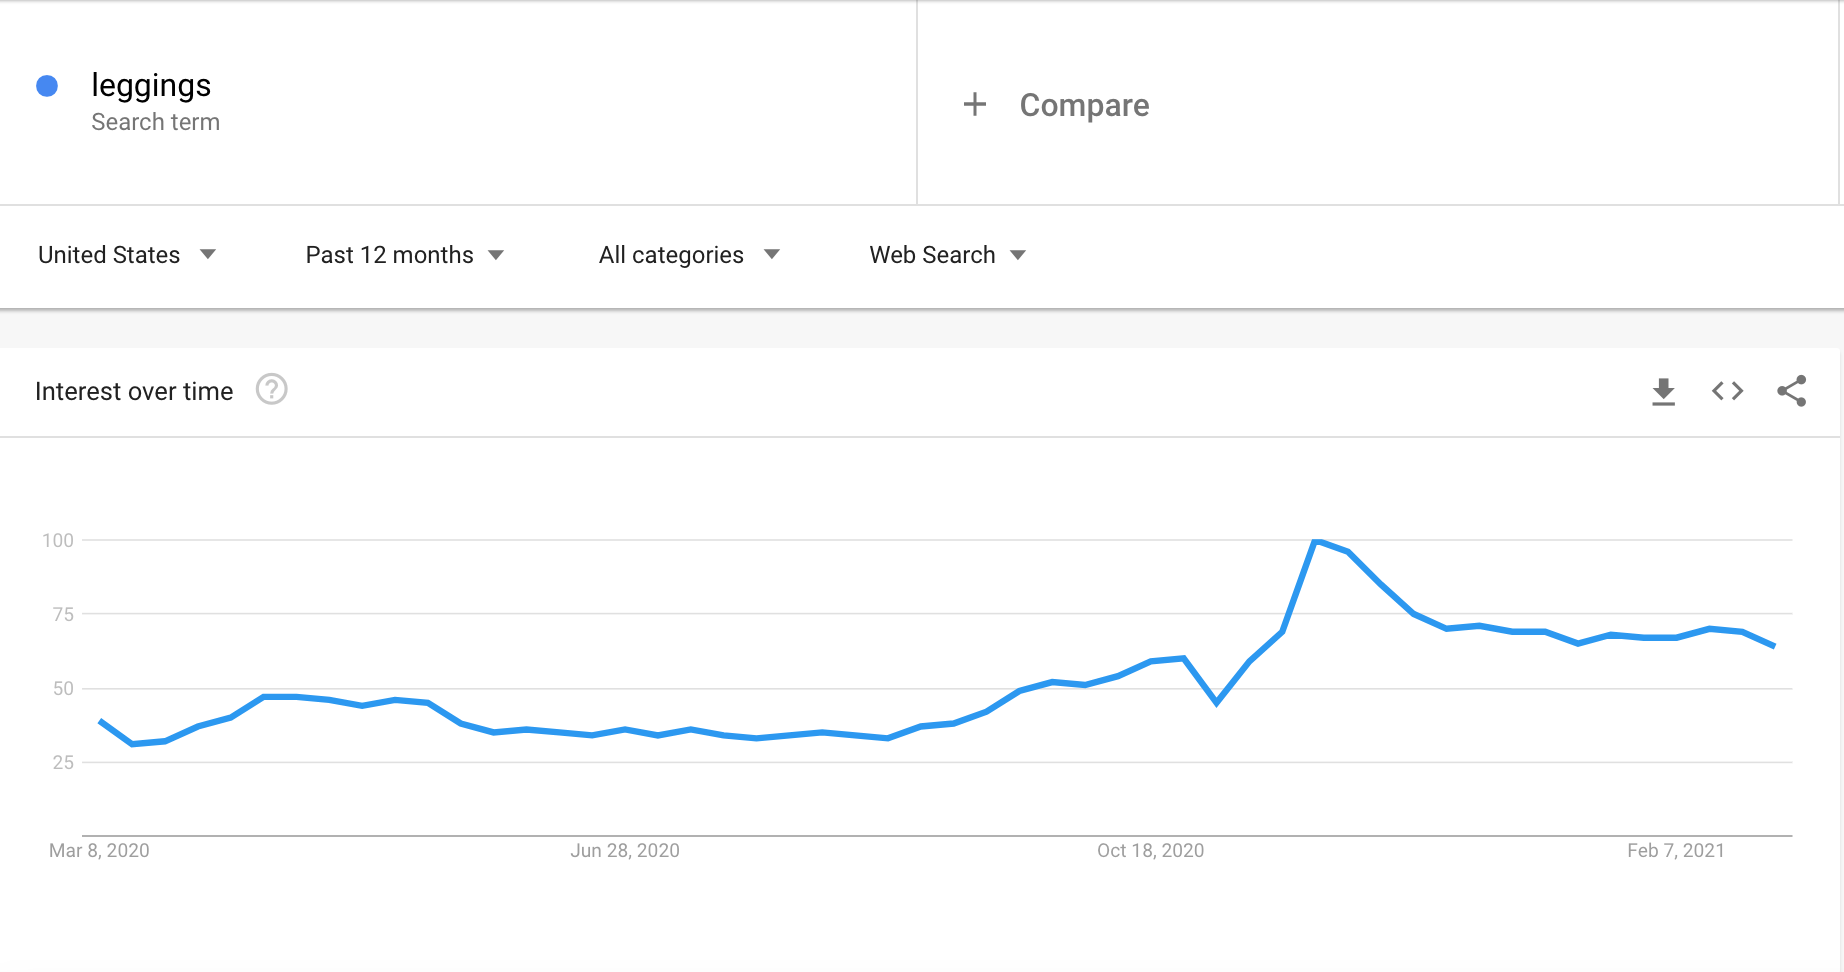 Google Trends graph showing the interest in leggings